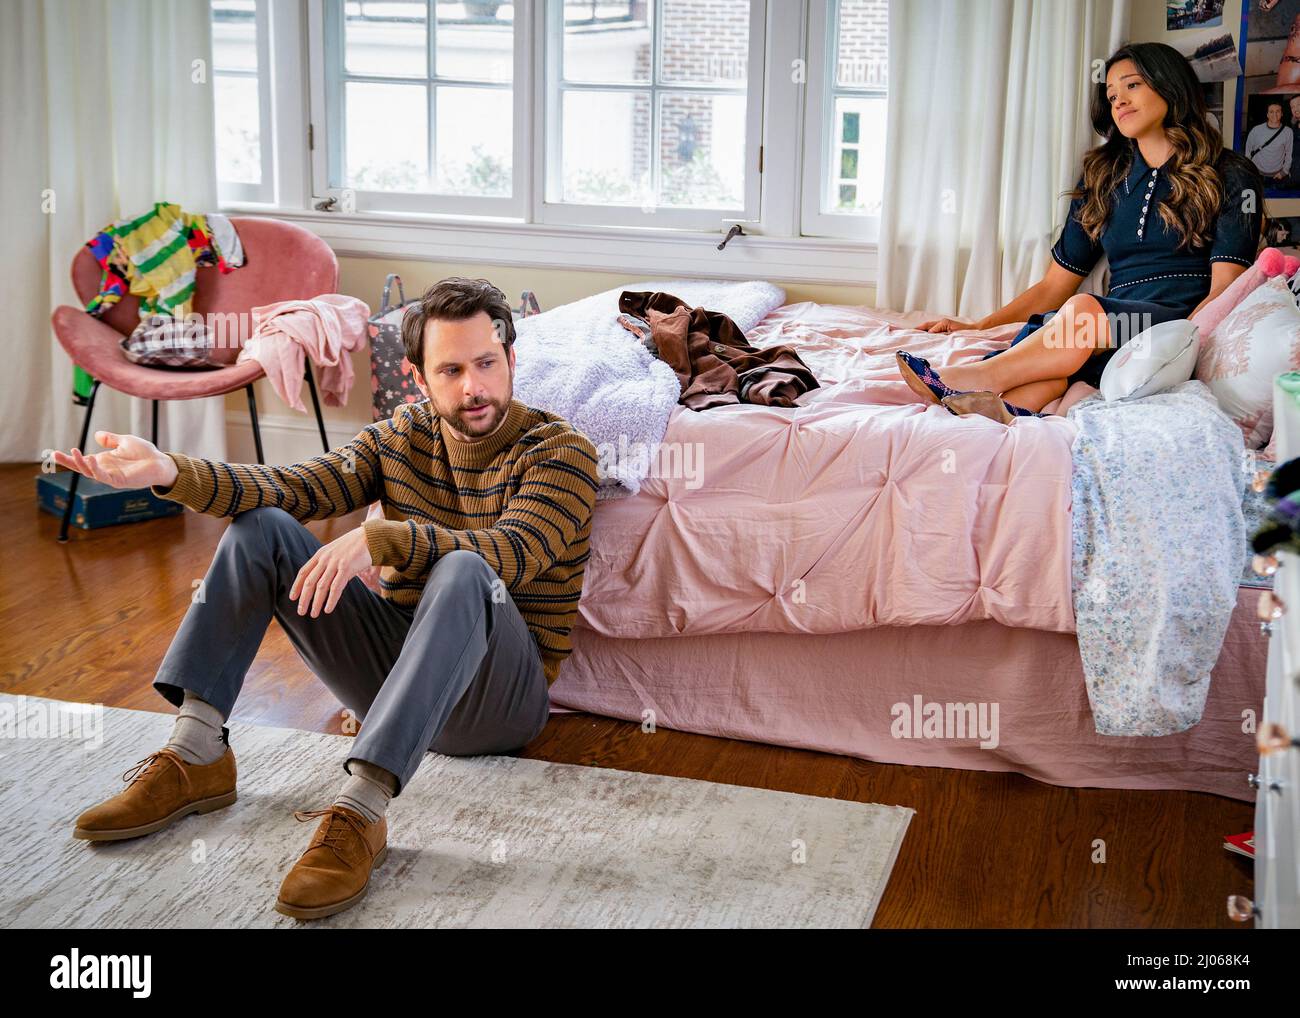 RELEASE DATE: February 11, 2022 TITLE: I Want You Back. STUDIO: Amazon Studios. DIRECTOR: Jason Orley. PLOT: Newly dumped thirty-somethings Peter and Emma team up to sabotage their exes' new relationships and win them back for good. STARRING: CHARLIE DAY as Peter, GINA RODRIGUEZ as Anne. (Credit Image: © Amazon Studios/Entertainment Pictures) Stock Photo